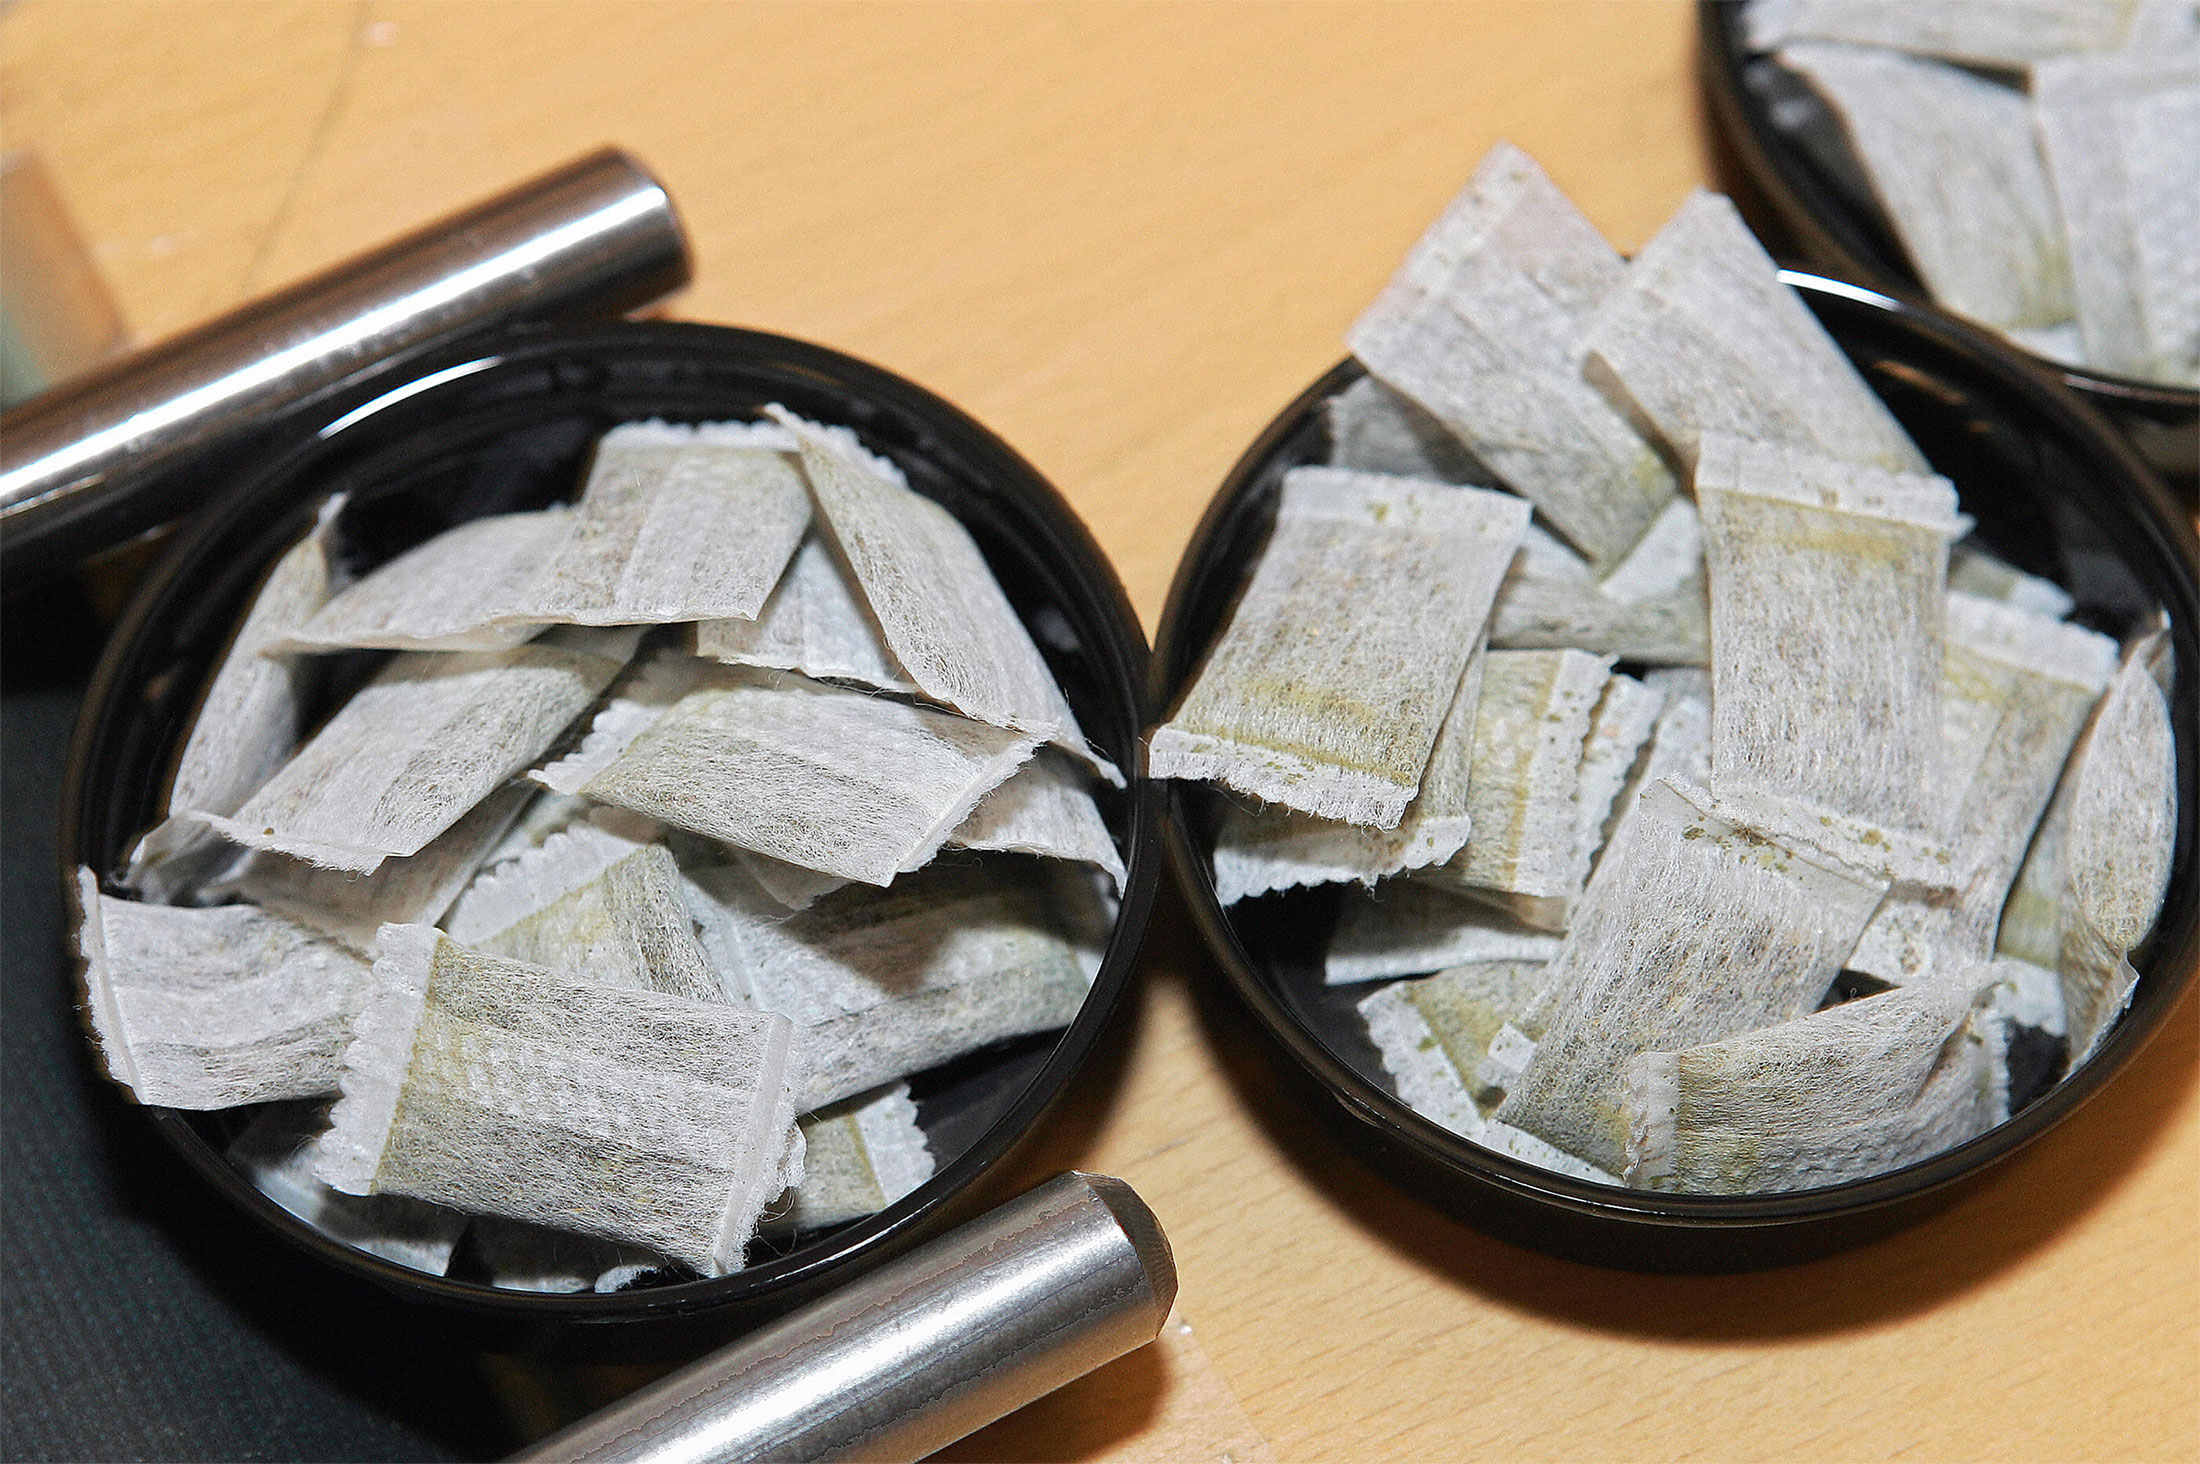 Bags of nicoten-free &quot;snus&quot; or snuff at